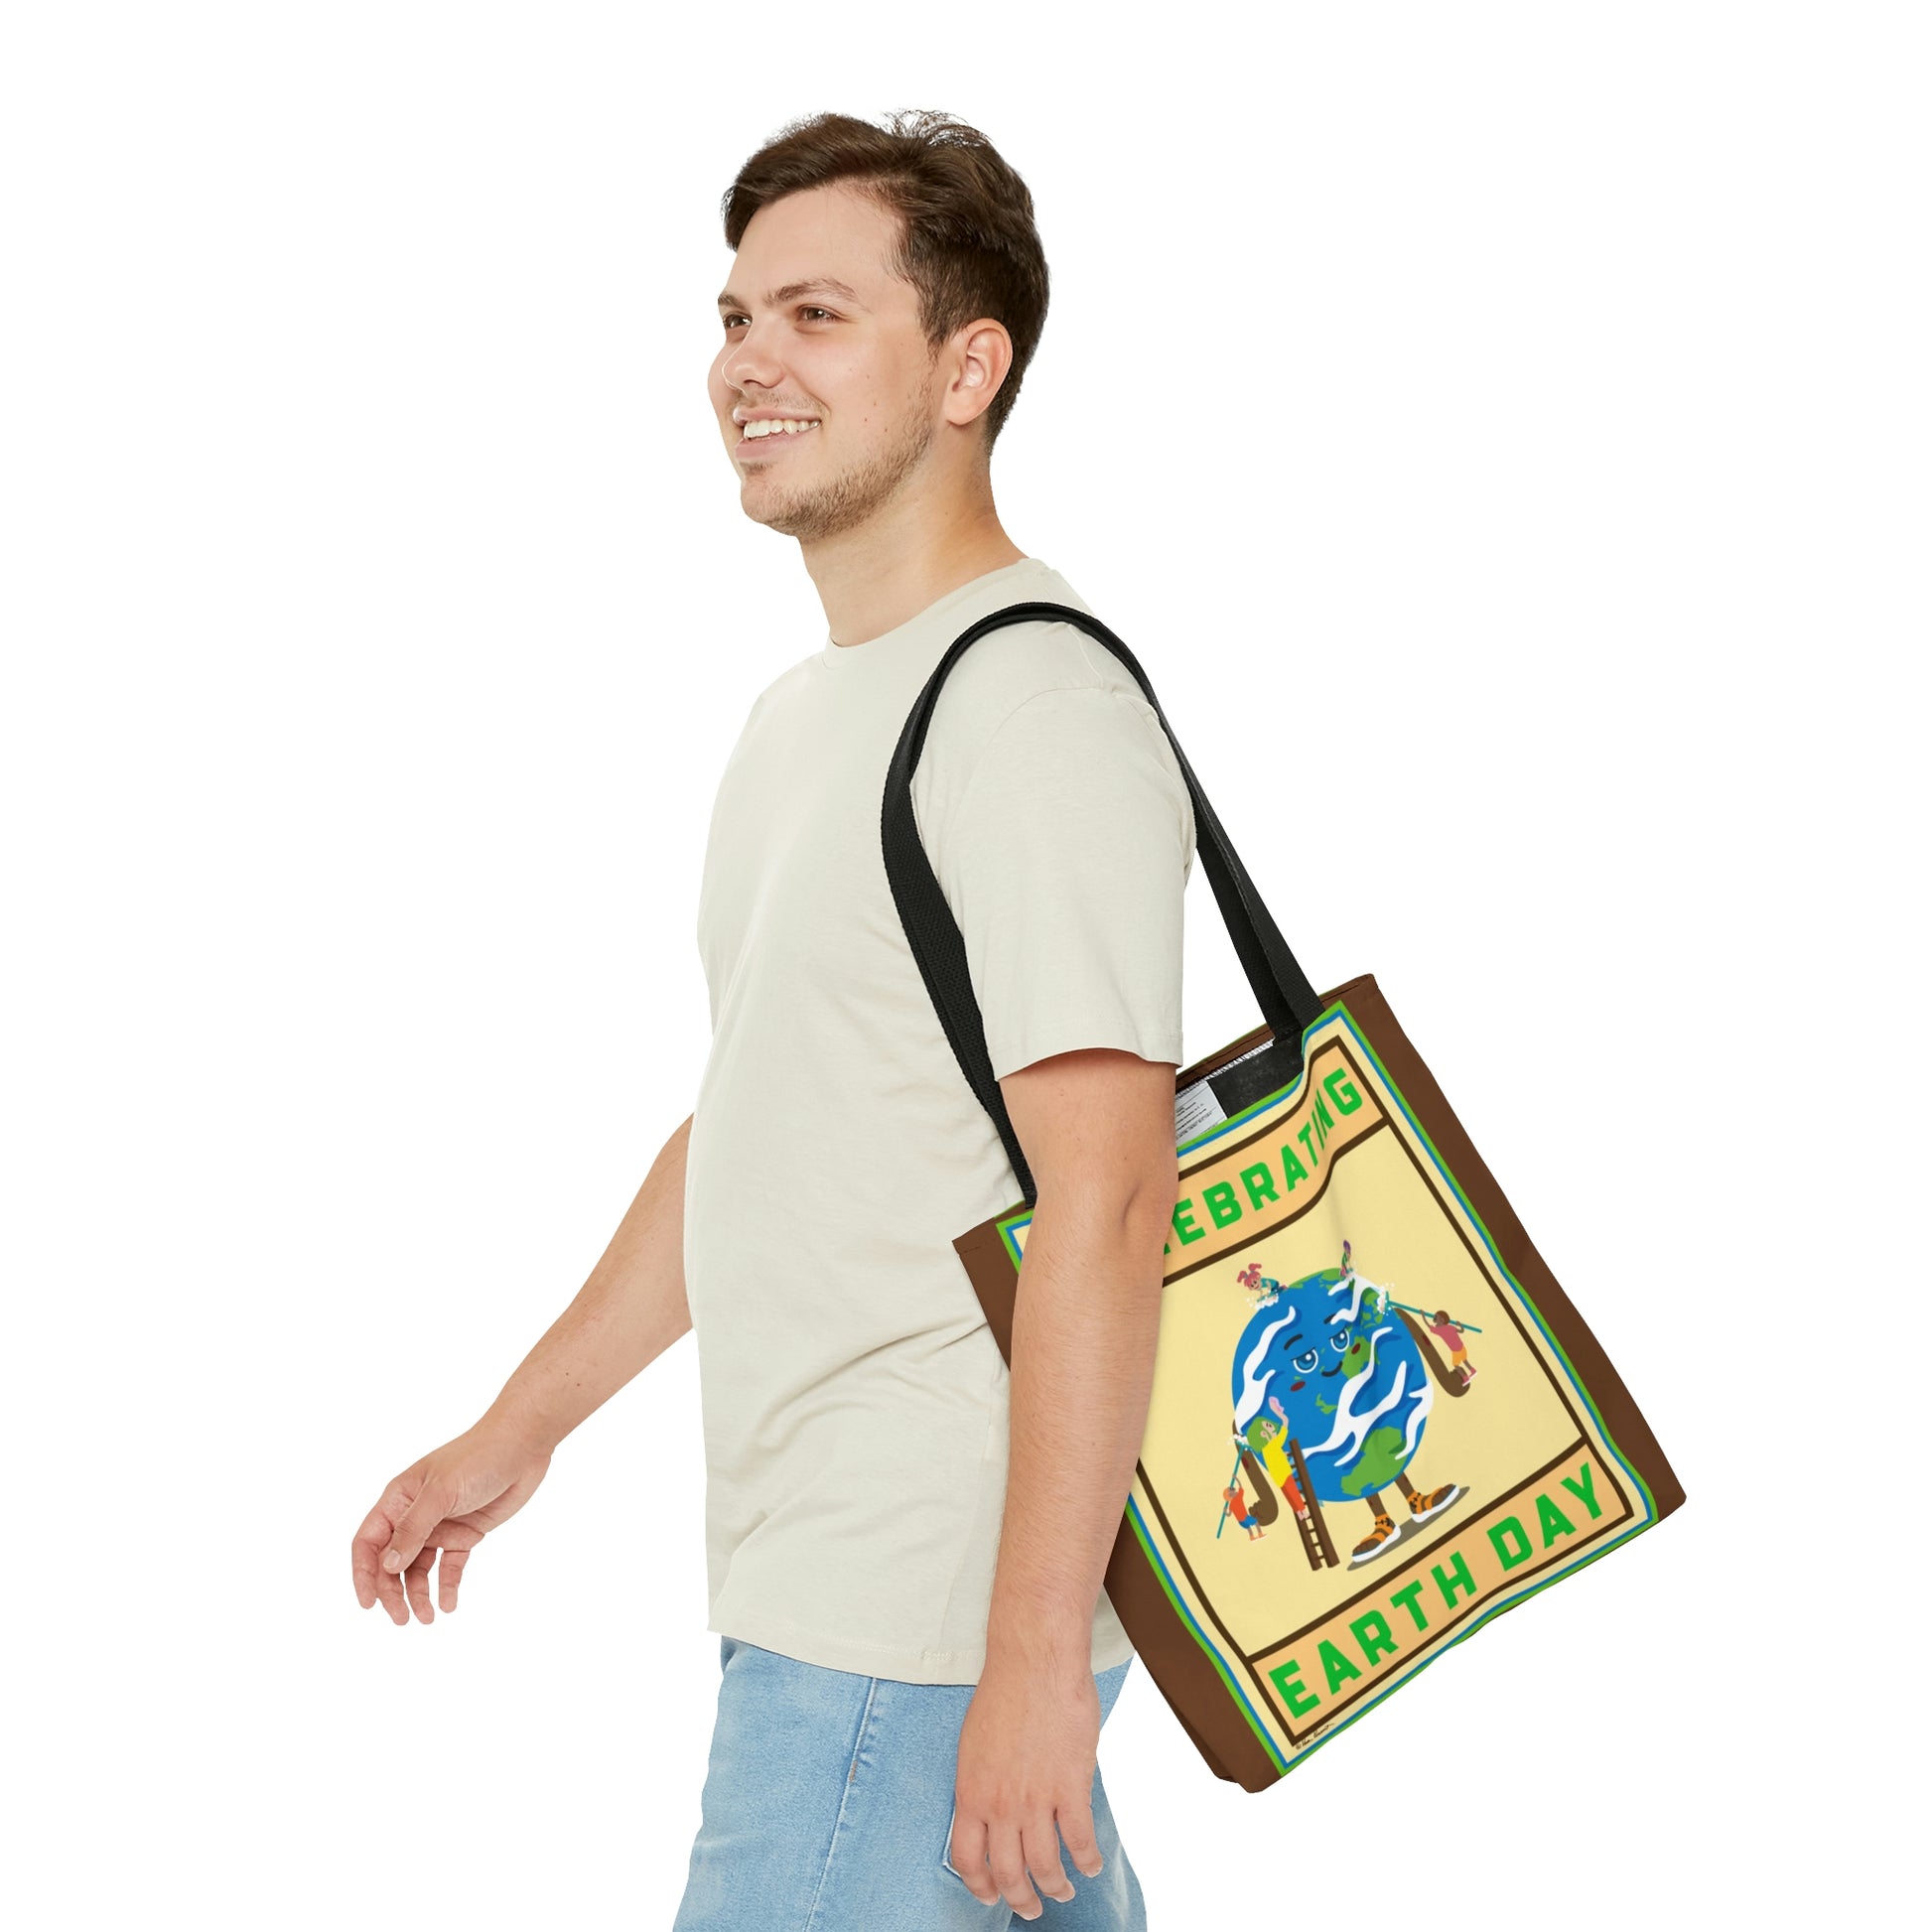 Mock up of small tote being carried on the shoulder of a man